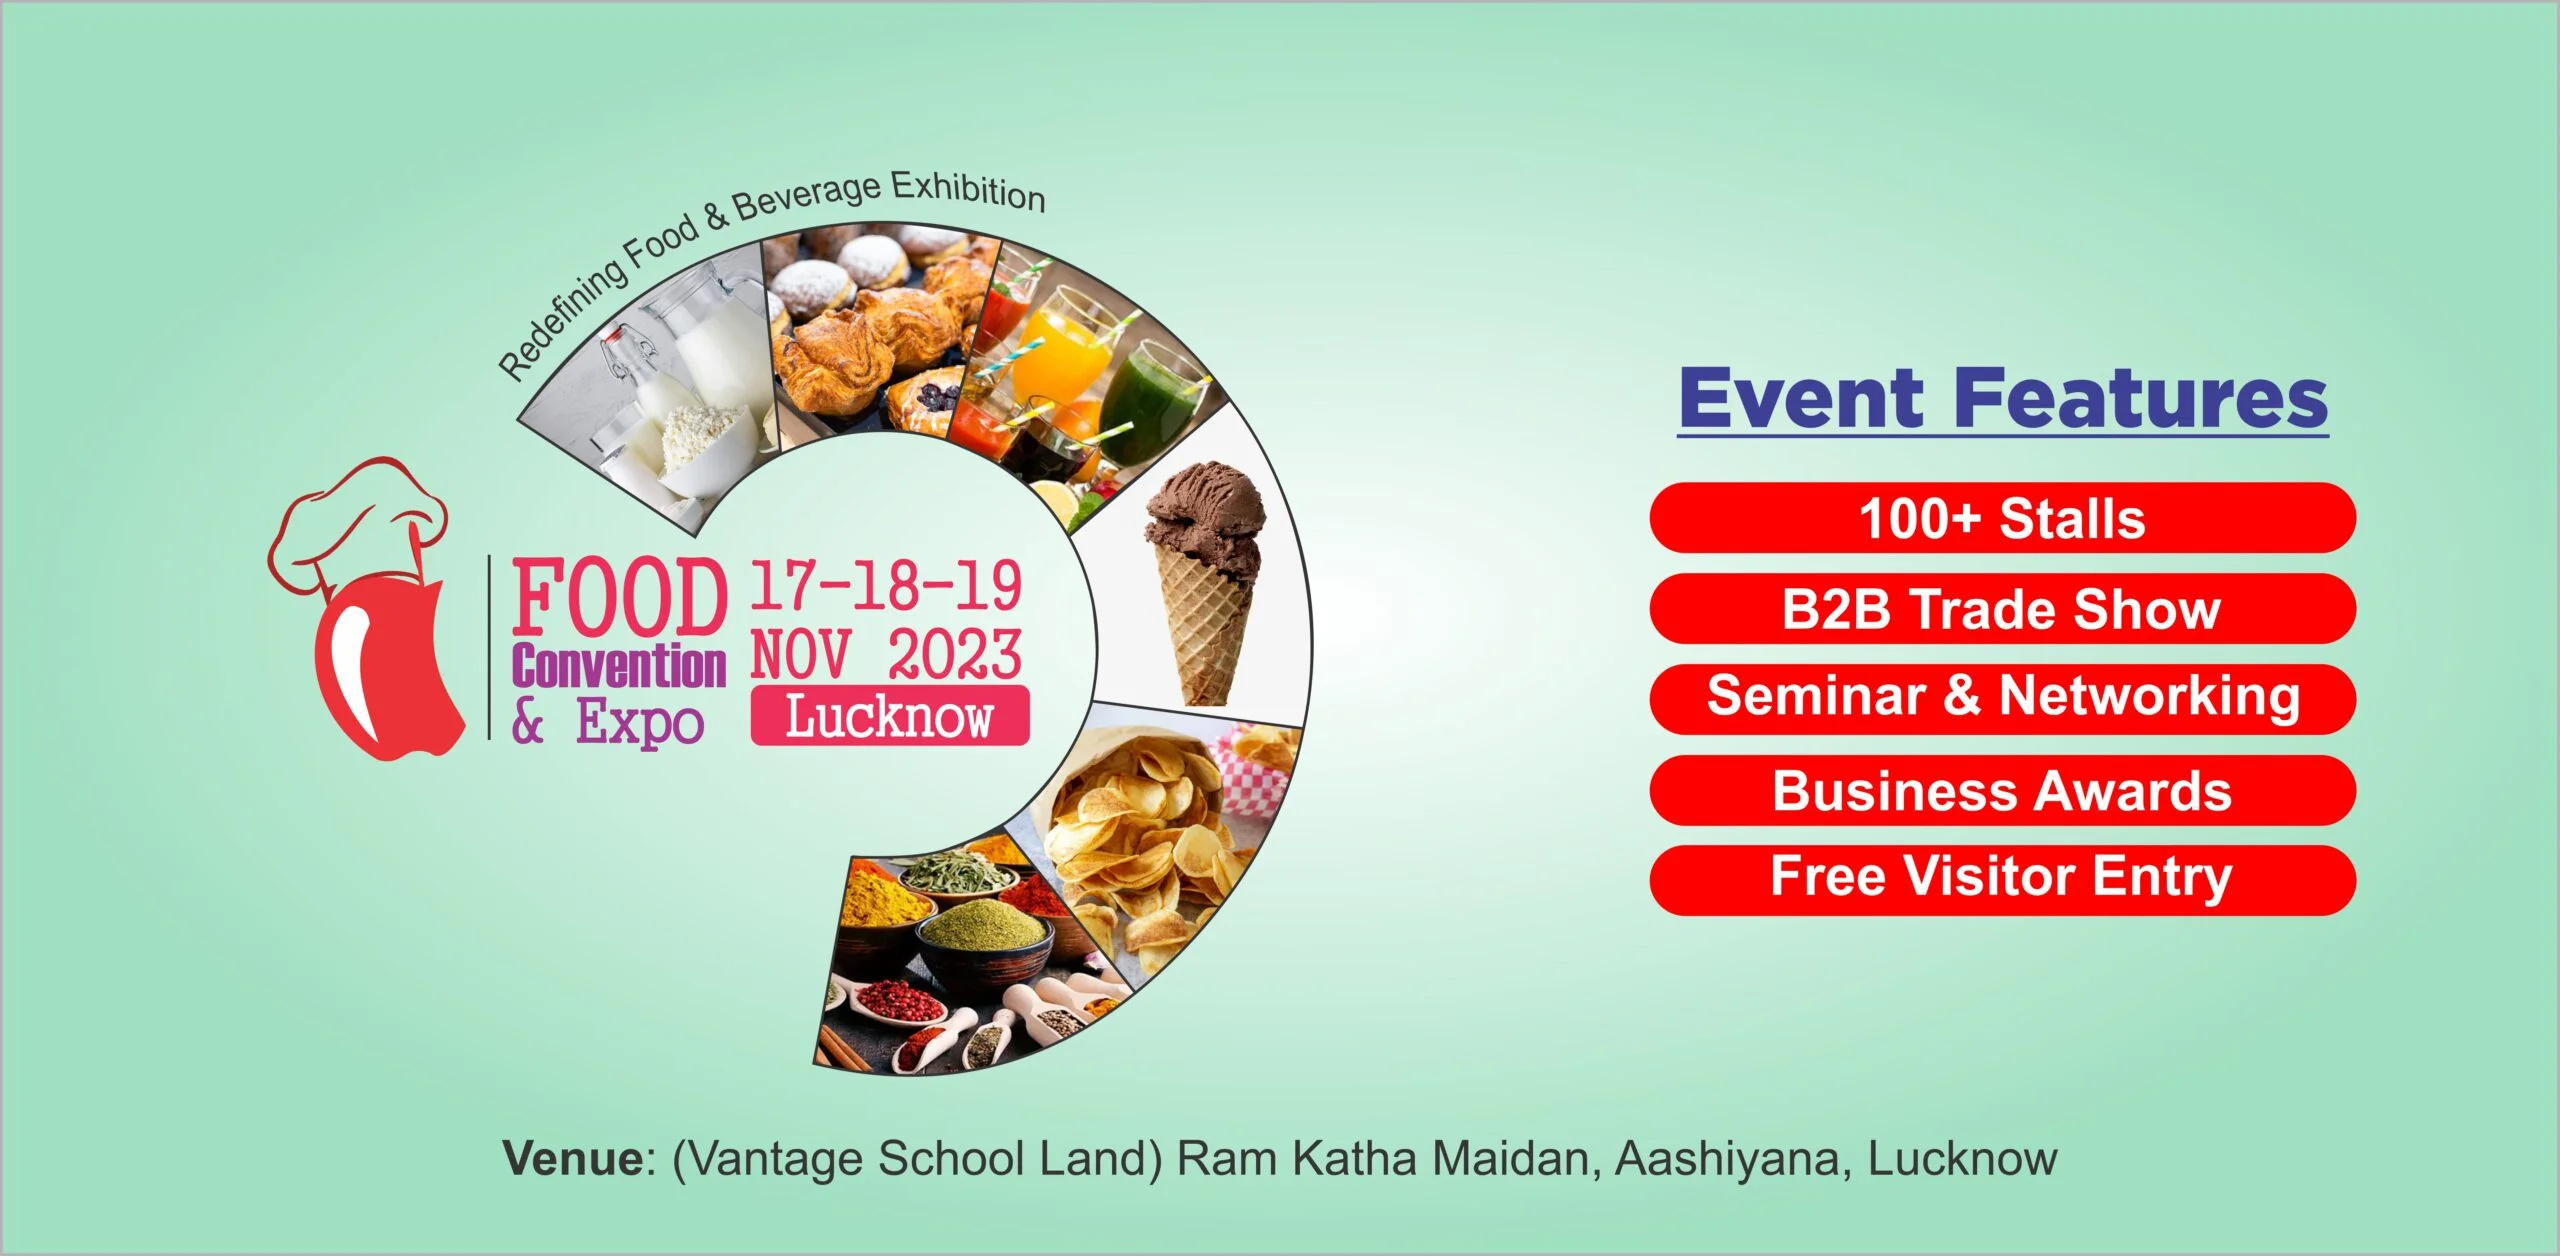 the Food Convention & Expo 2023